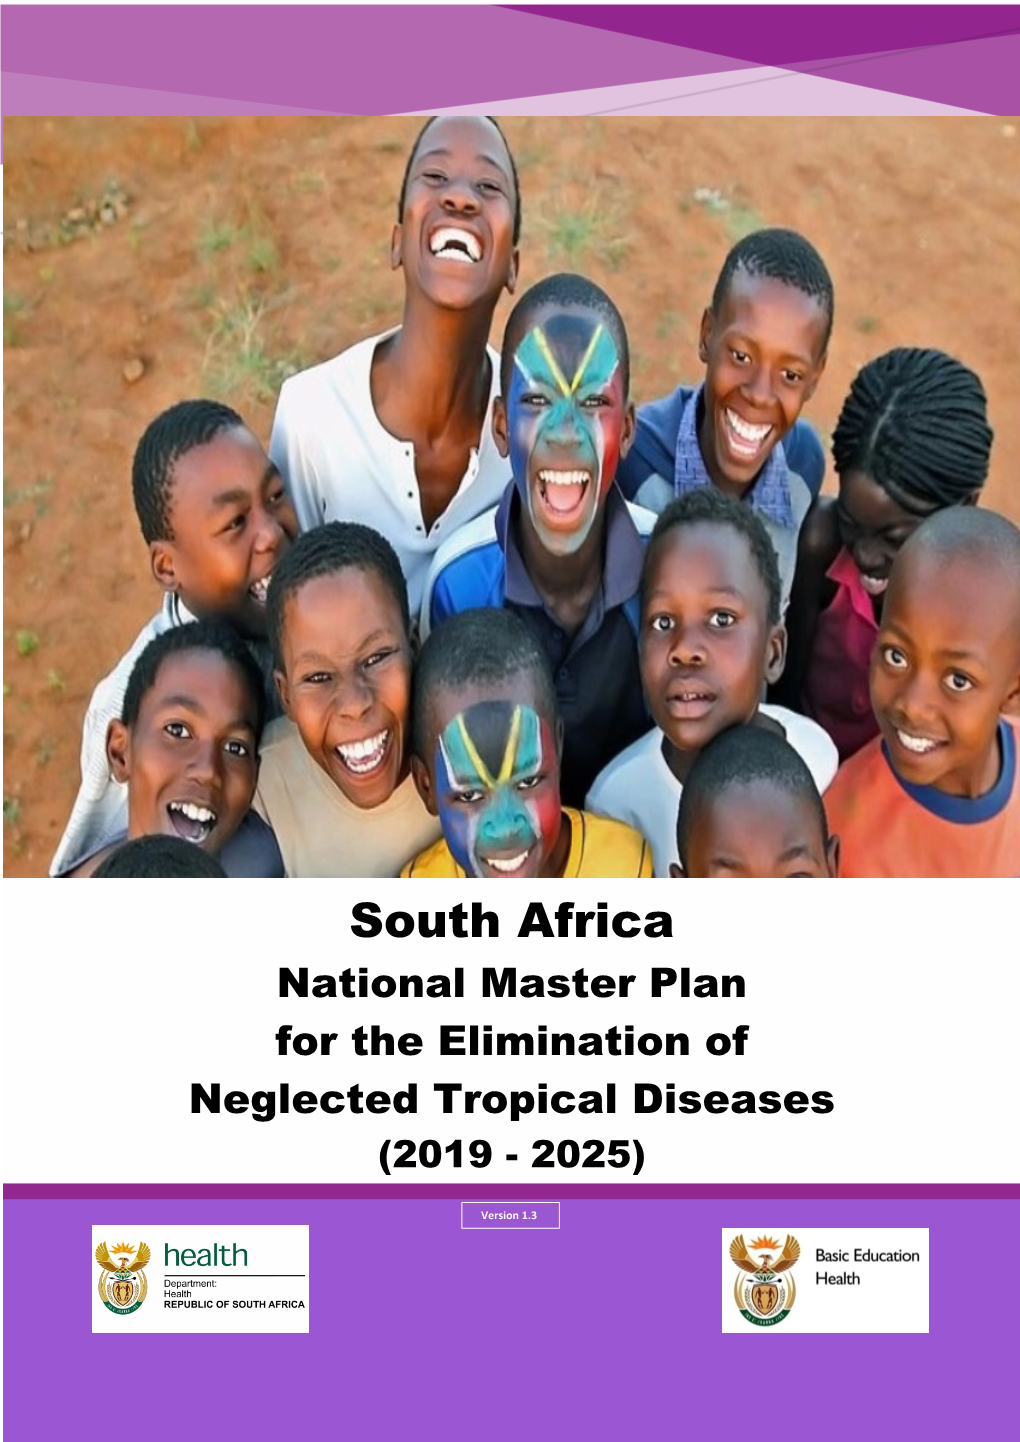 South Africa National Master Plan for the Elimination of Neglected Tropical Diseases (2019 - 2025)